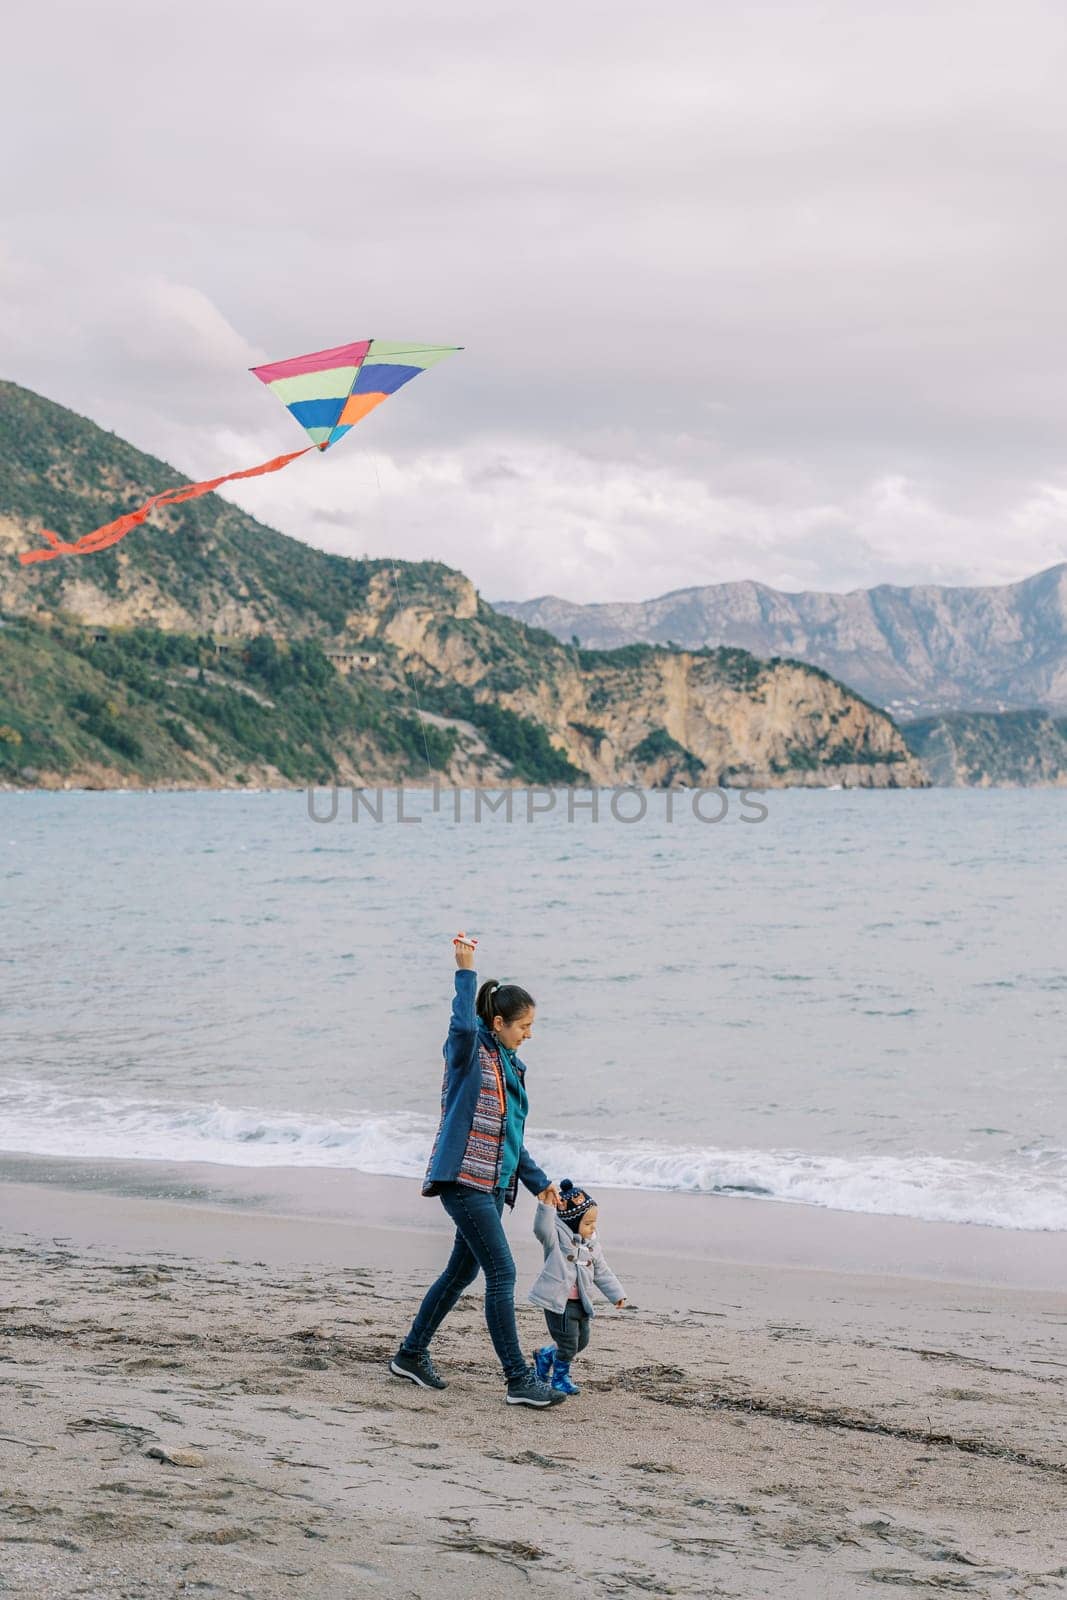 Mom with a little girl walk holding hands along the beach with a kite on a rope. Side view. High quality photo